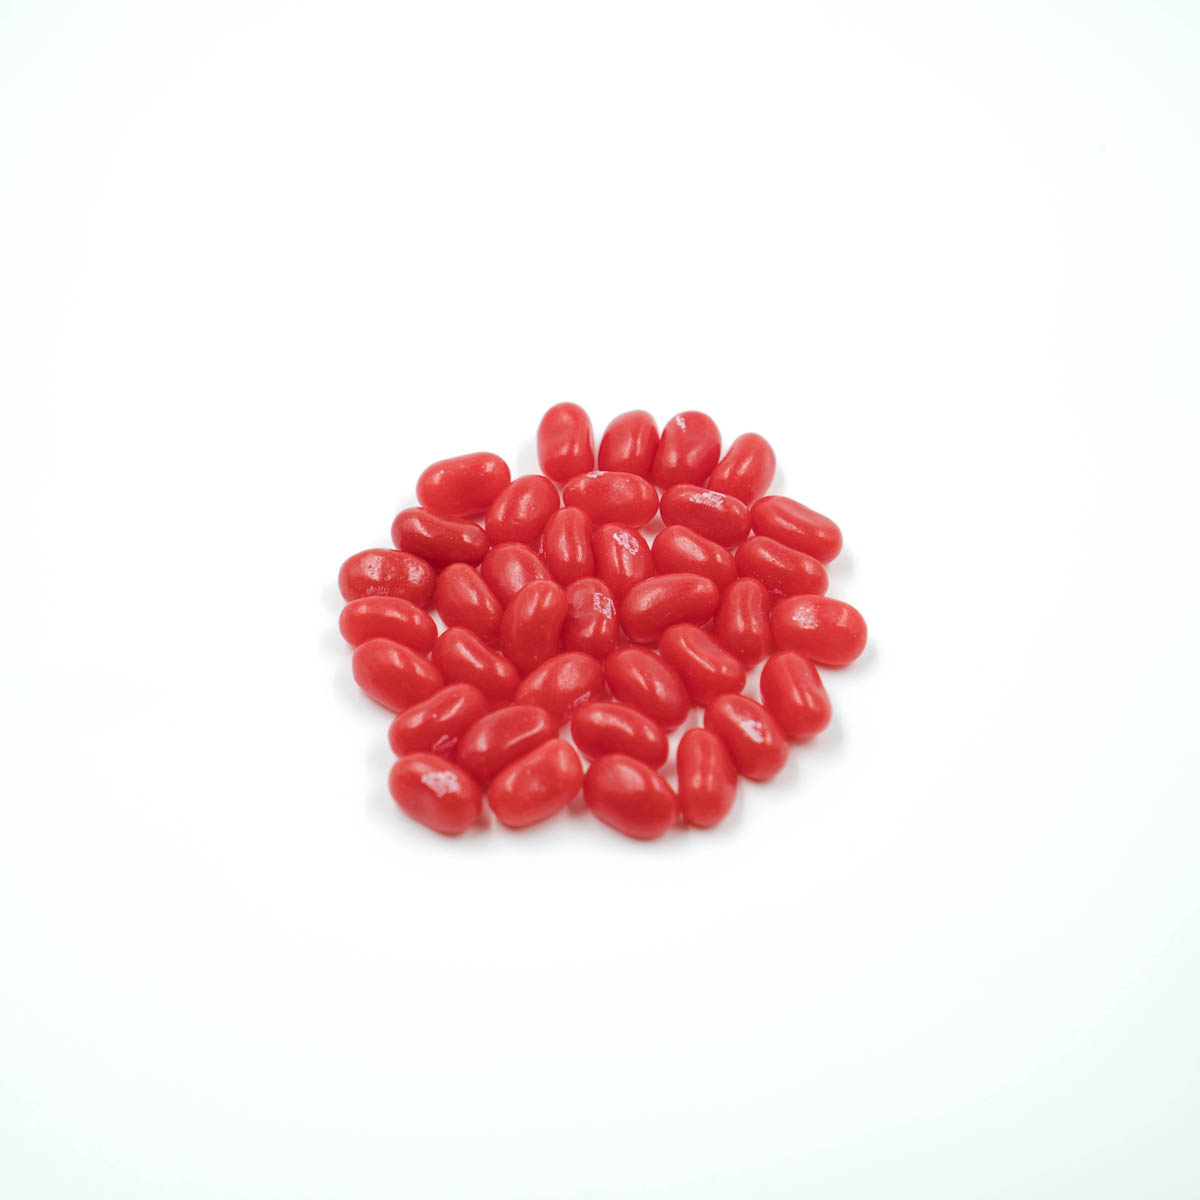 Candy Jelly belly Cinnamon